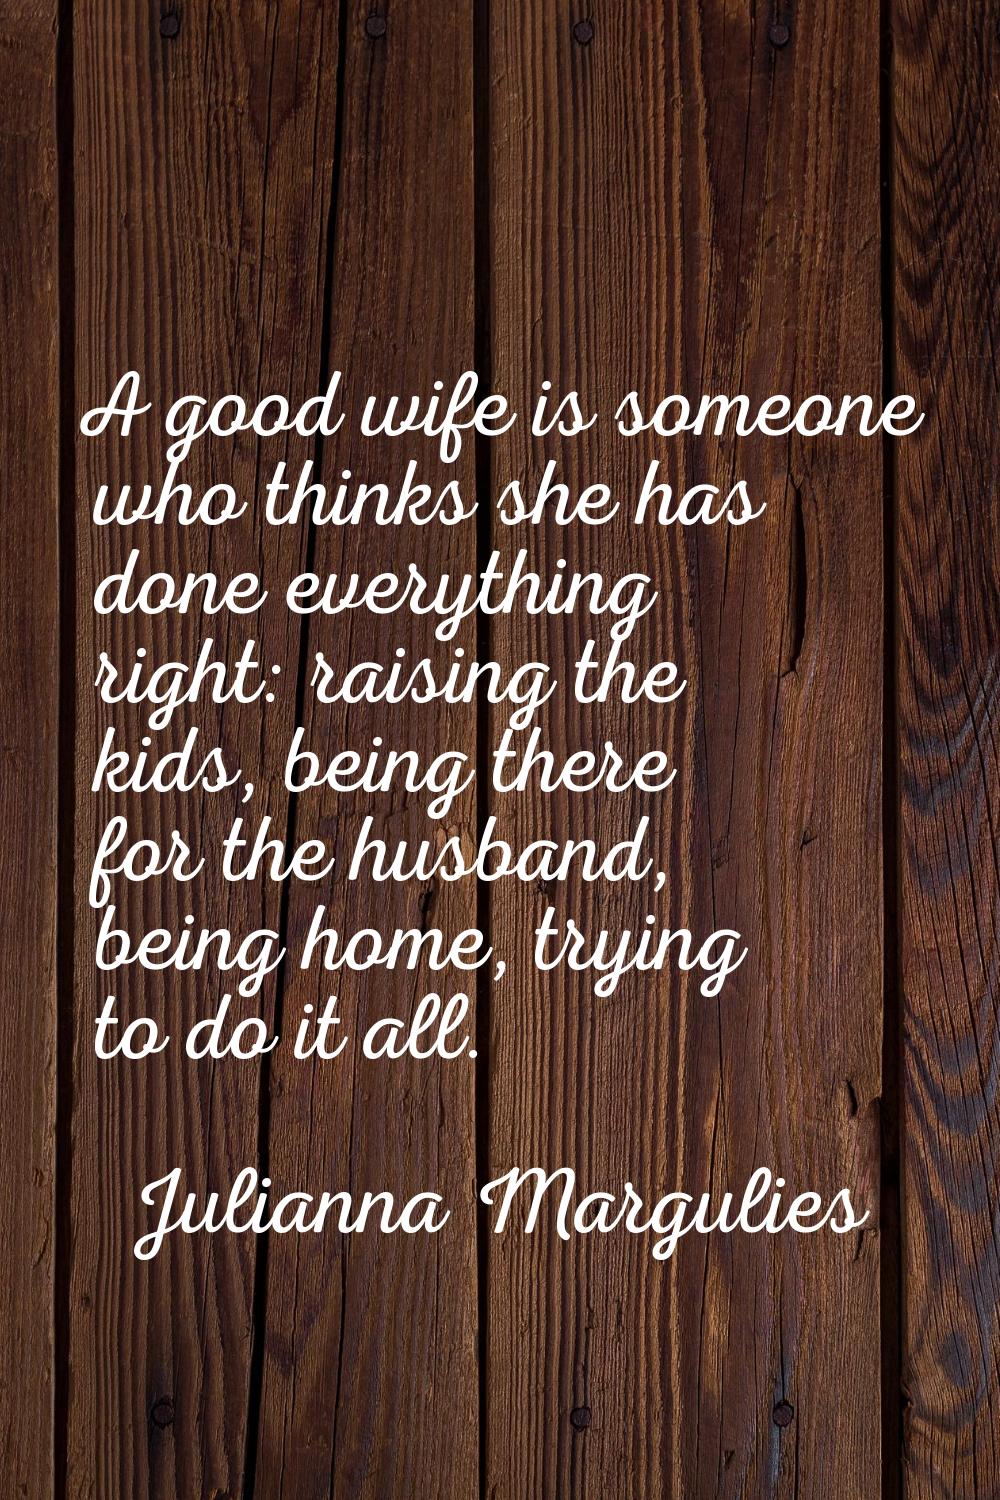 A good wife is someone who thinks she has done everything right: raising the kids, being there for 